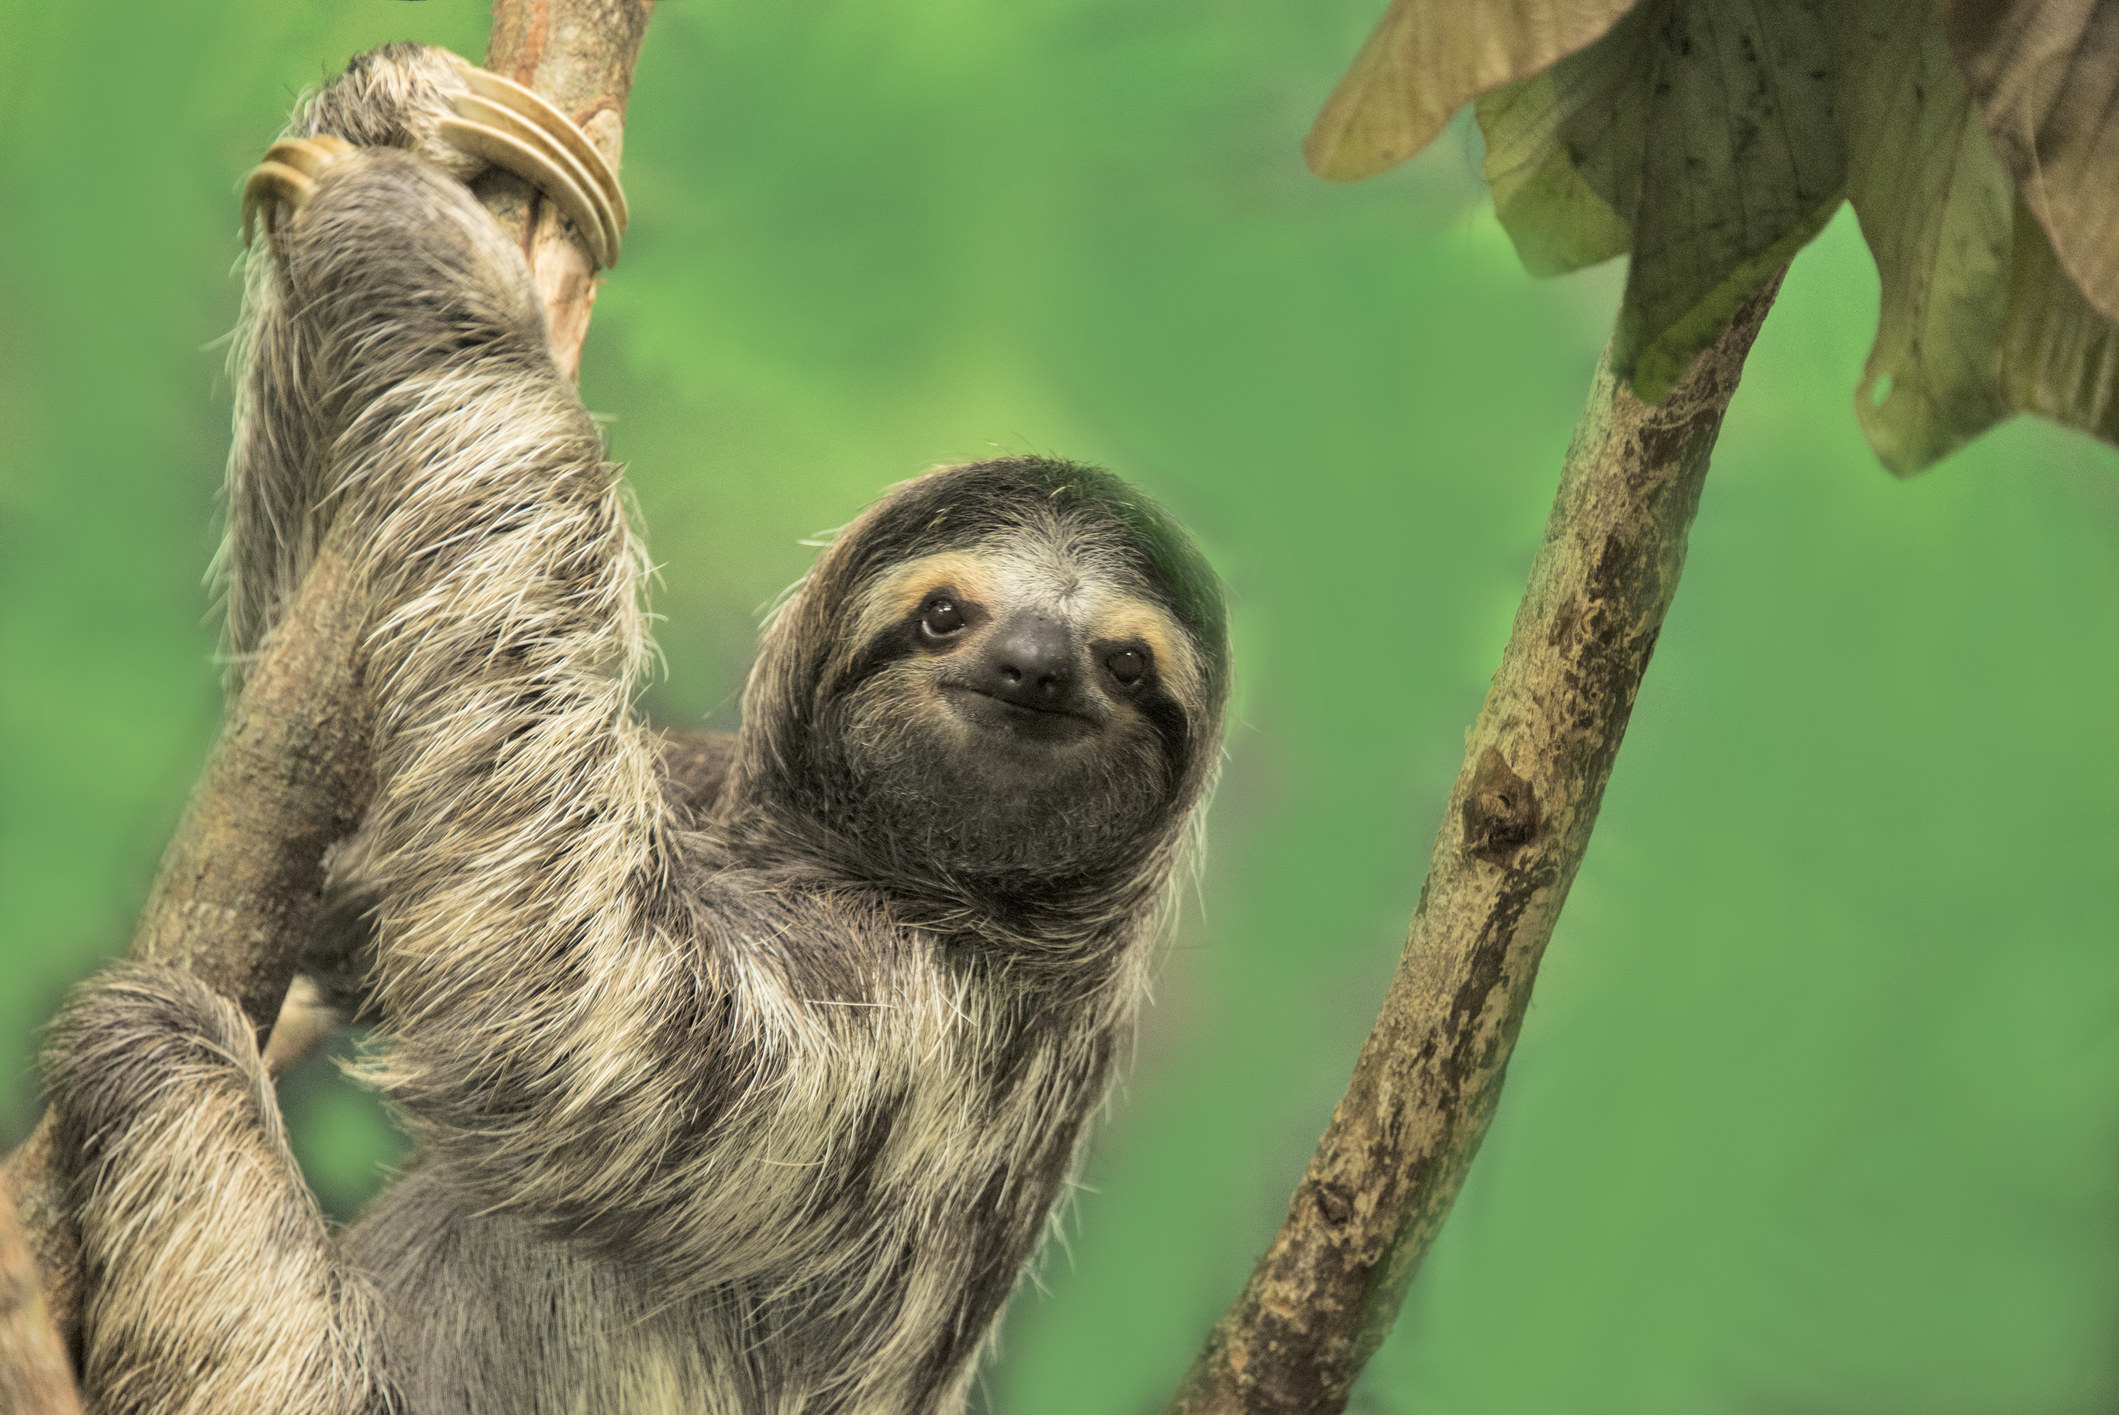 sloth on a branch